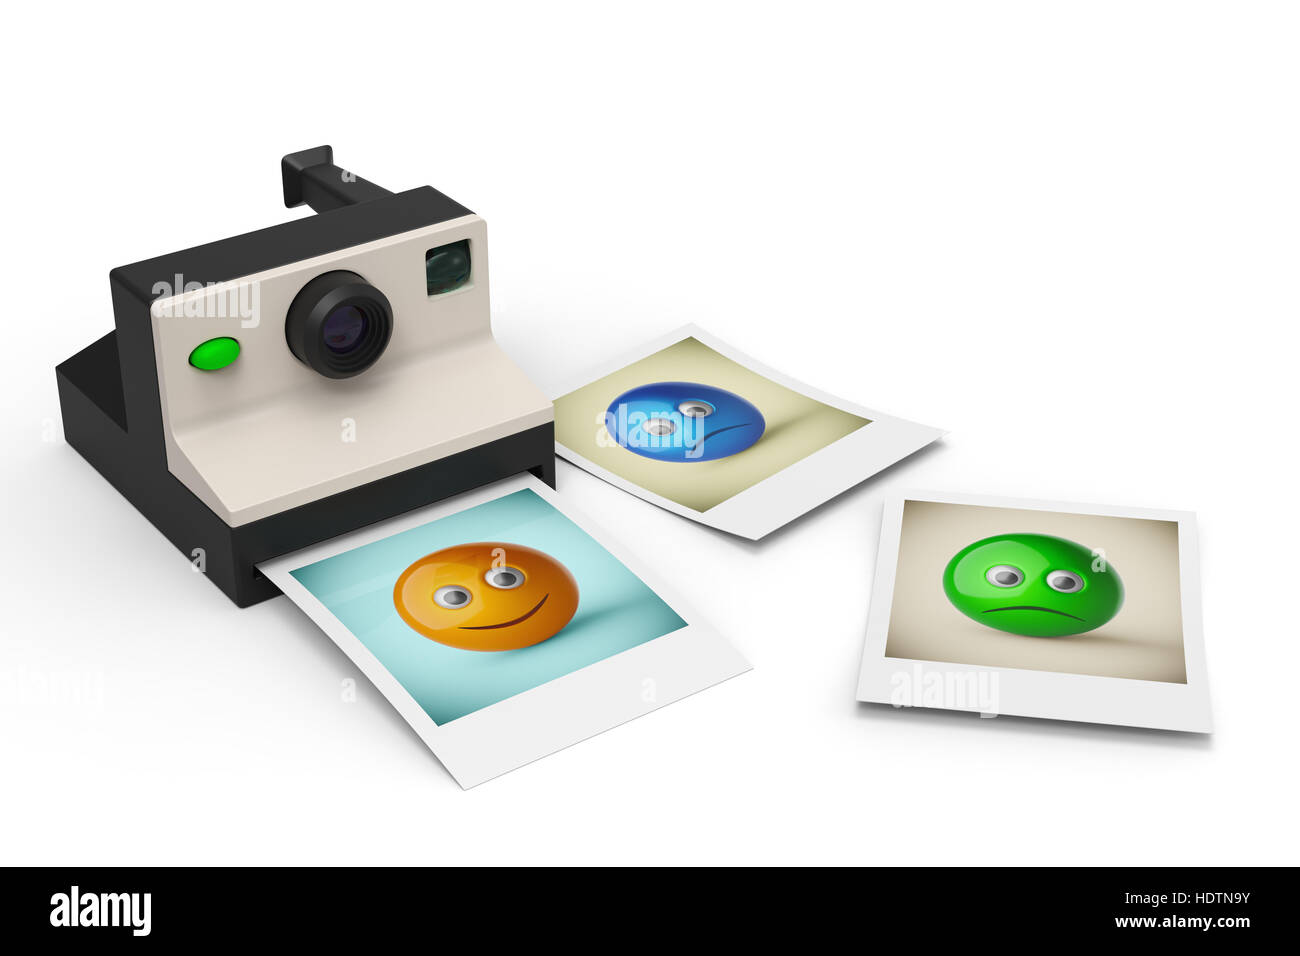 simple instant photo camera with smiley symbol photos 3d render Stock Photo